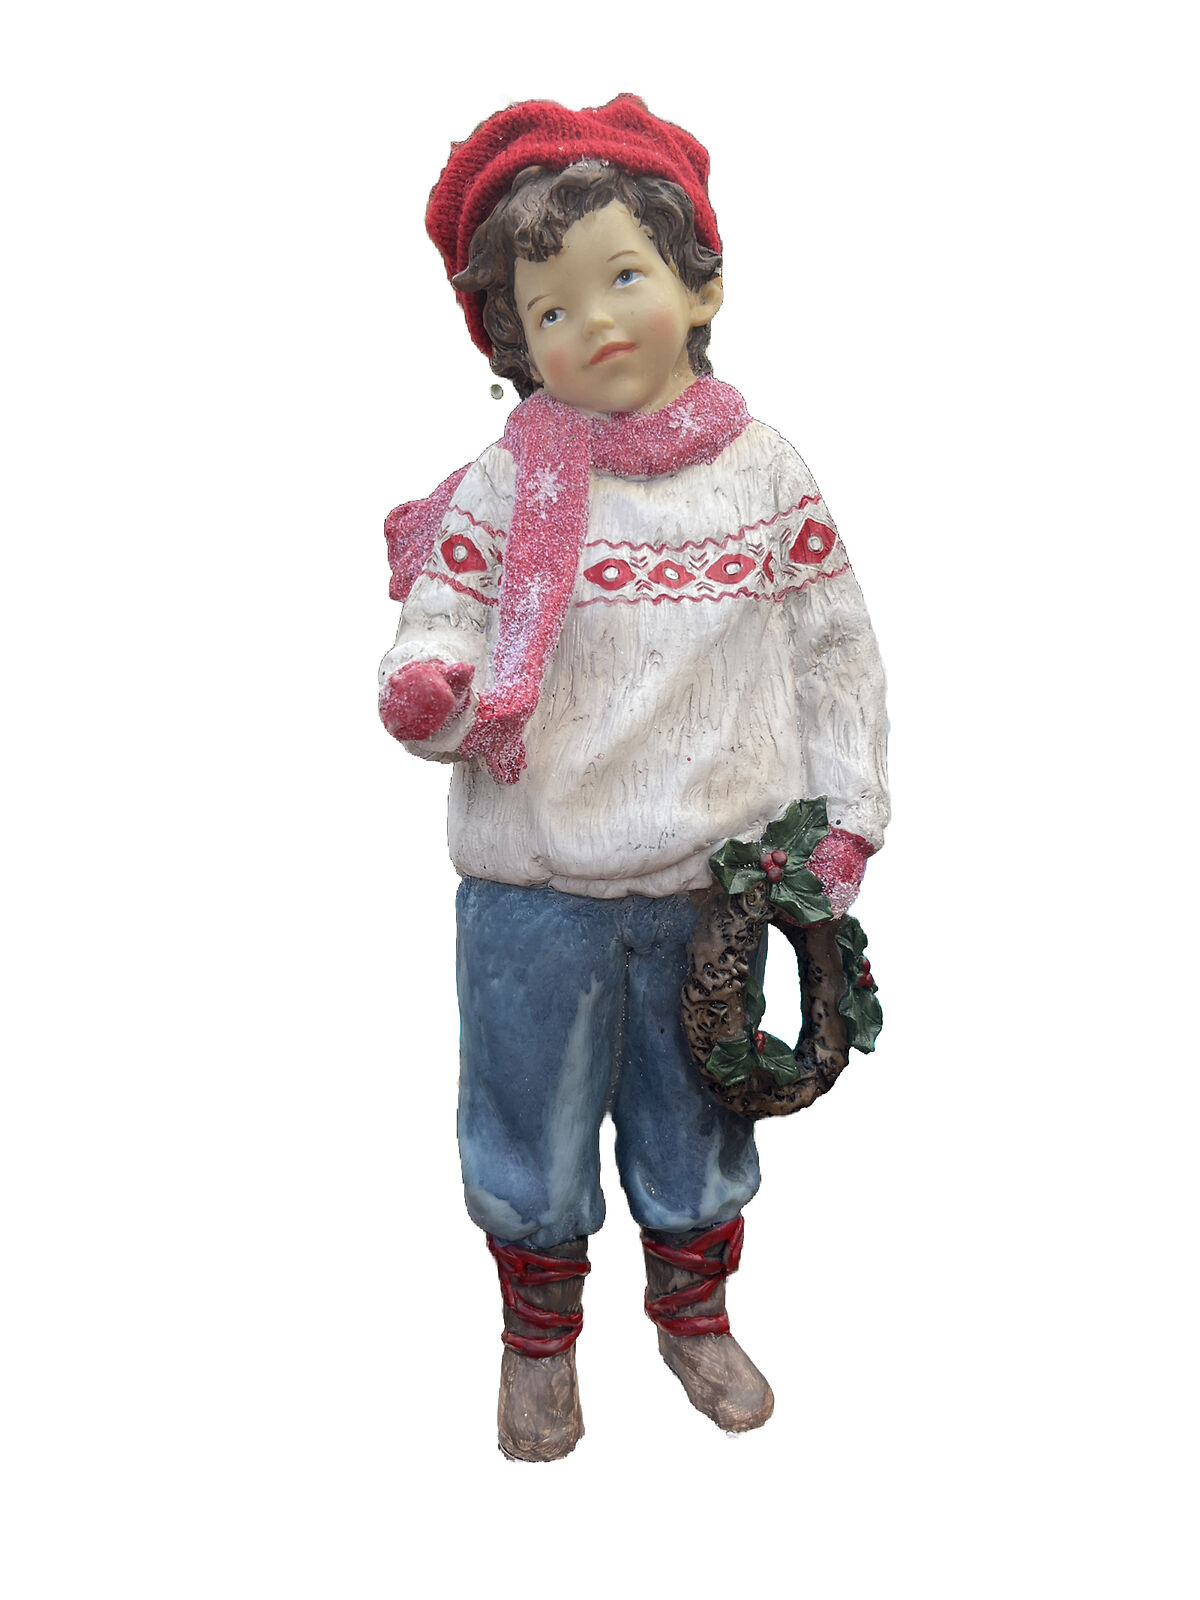 Farmhouse Christmas Sweater Boy Figure w/ Wreath And Snow 13” Tall Cottage core